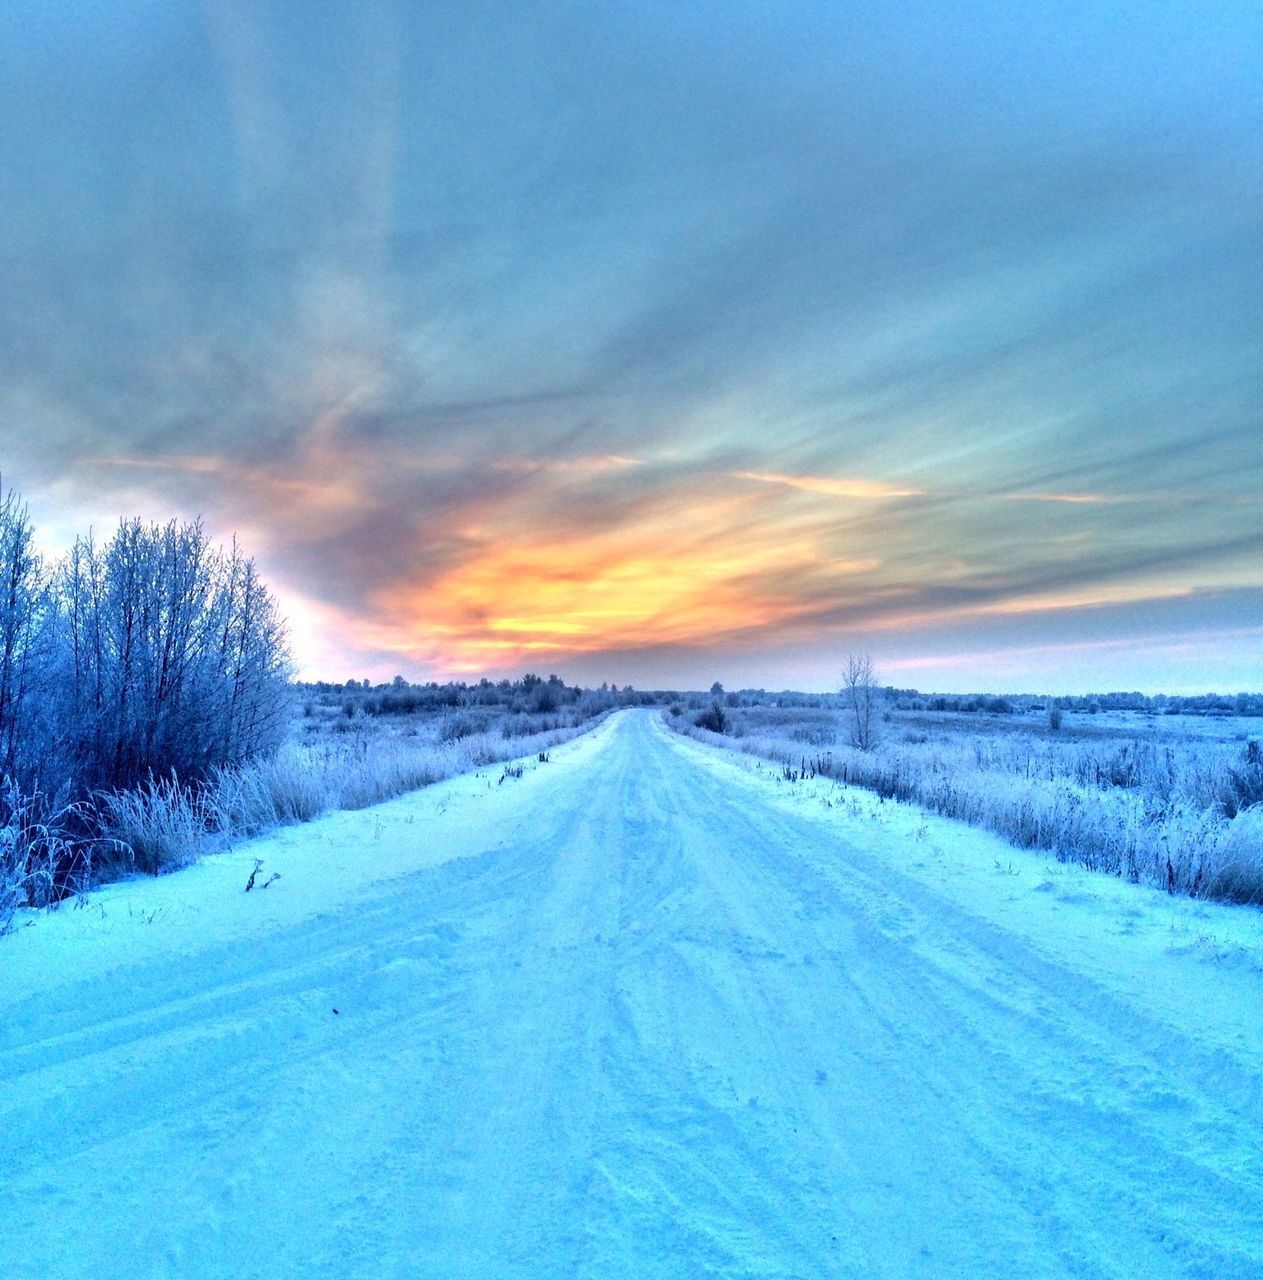 snow, winter, cold temperature, season, weather, covering, landscape, tranquil scene, tranquility, sky, the way forward, sunset, scenics, beauty in nature, nature, field, road, covered, diminishing perspective, frozen